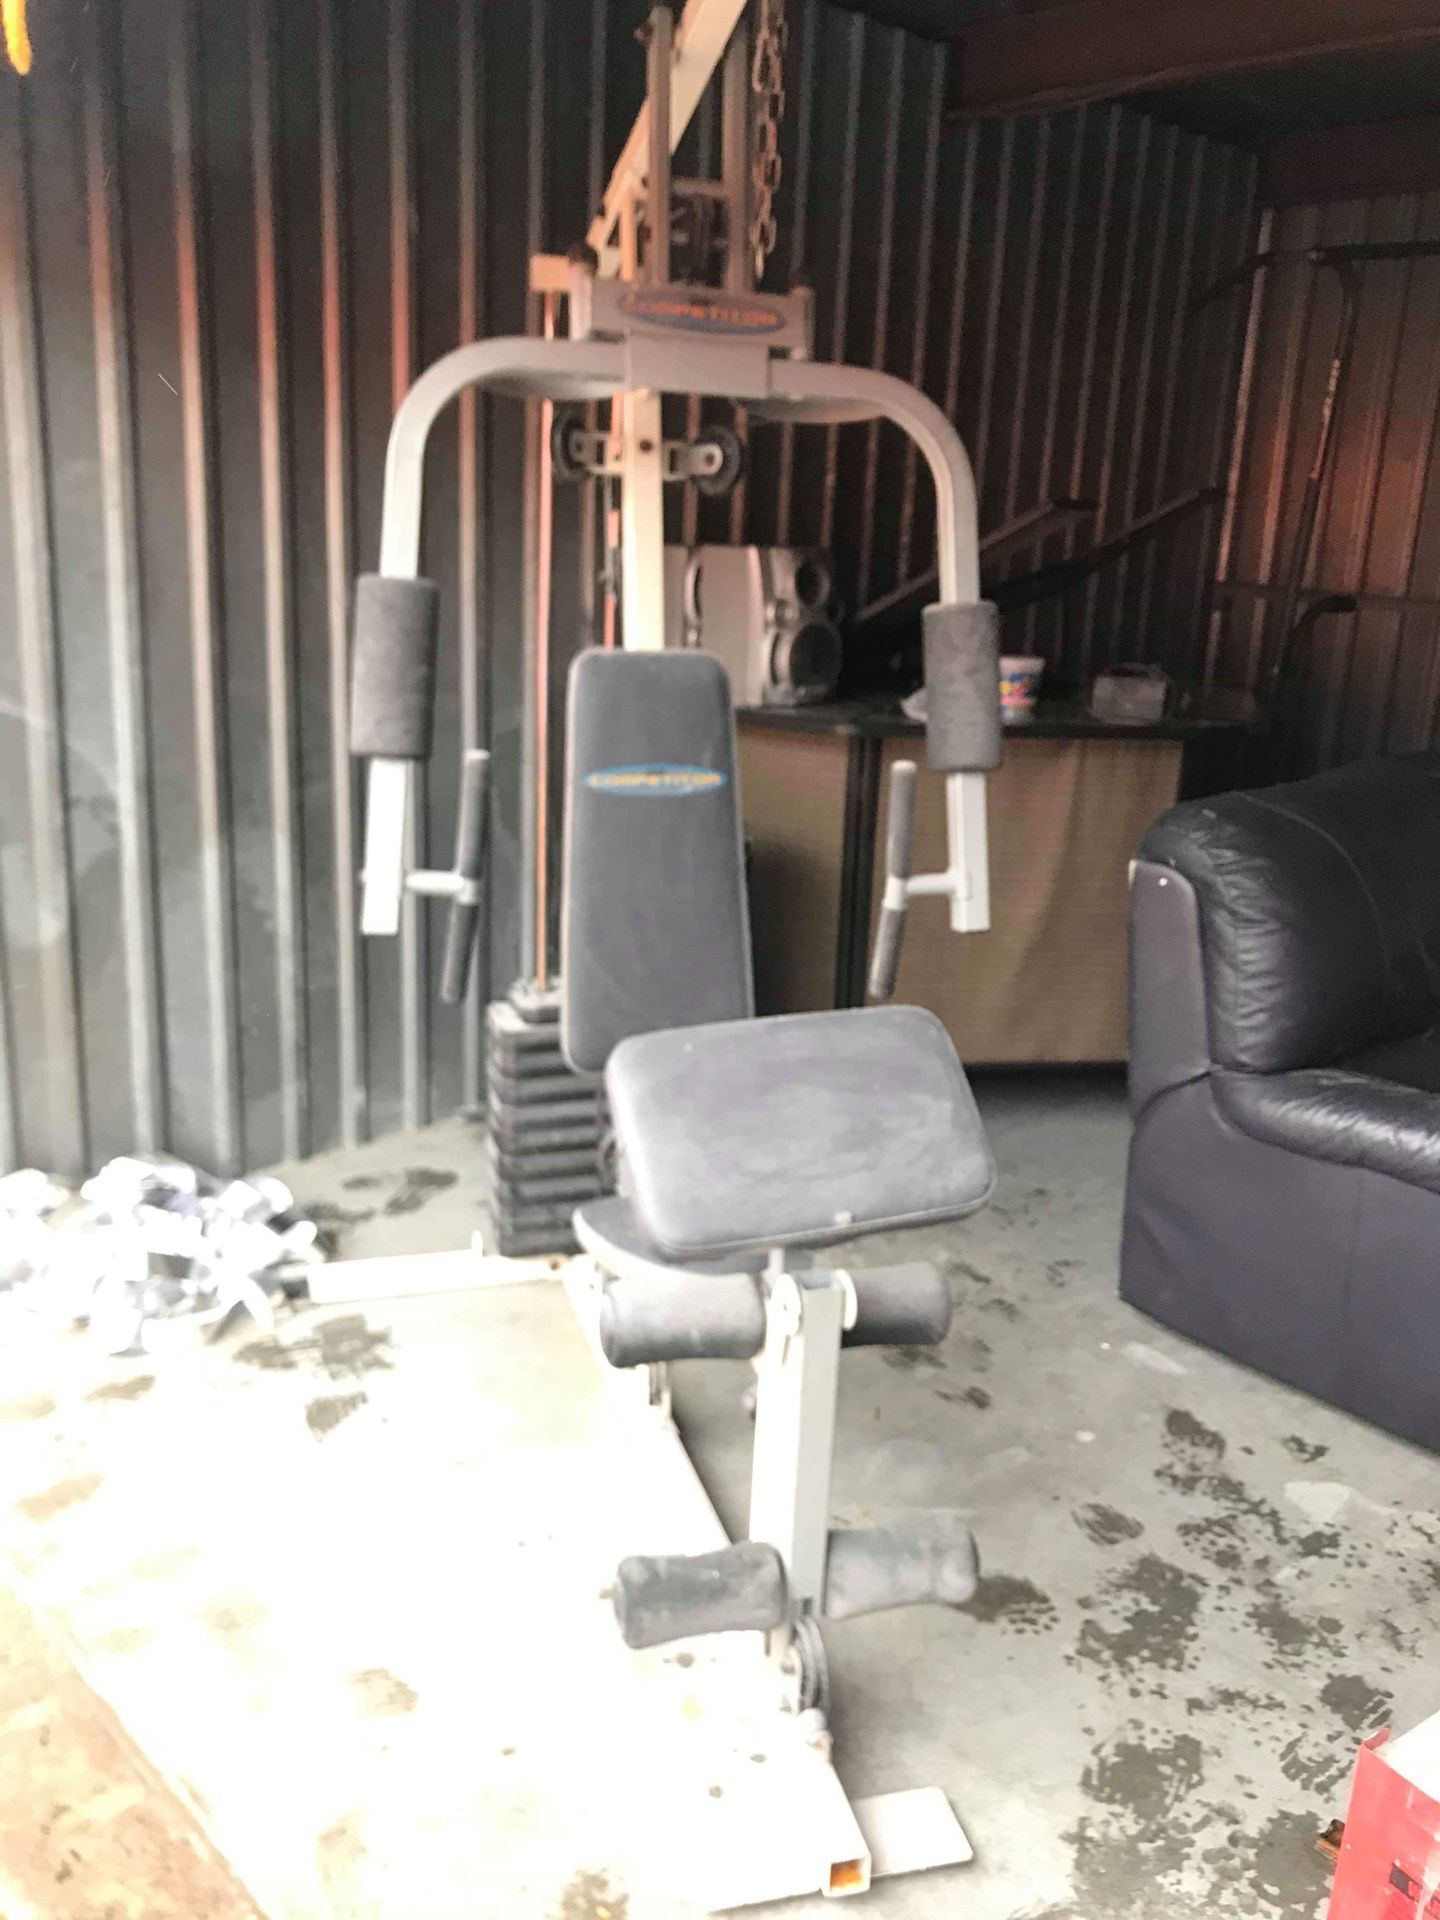 USED EXERCISE EQUIPMENT